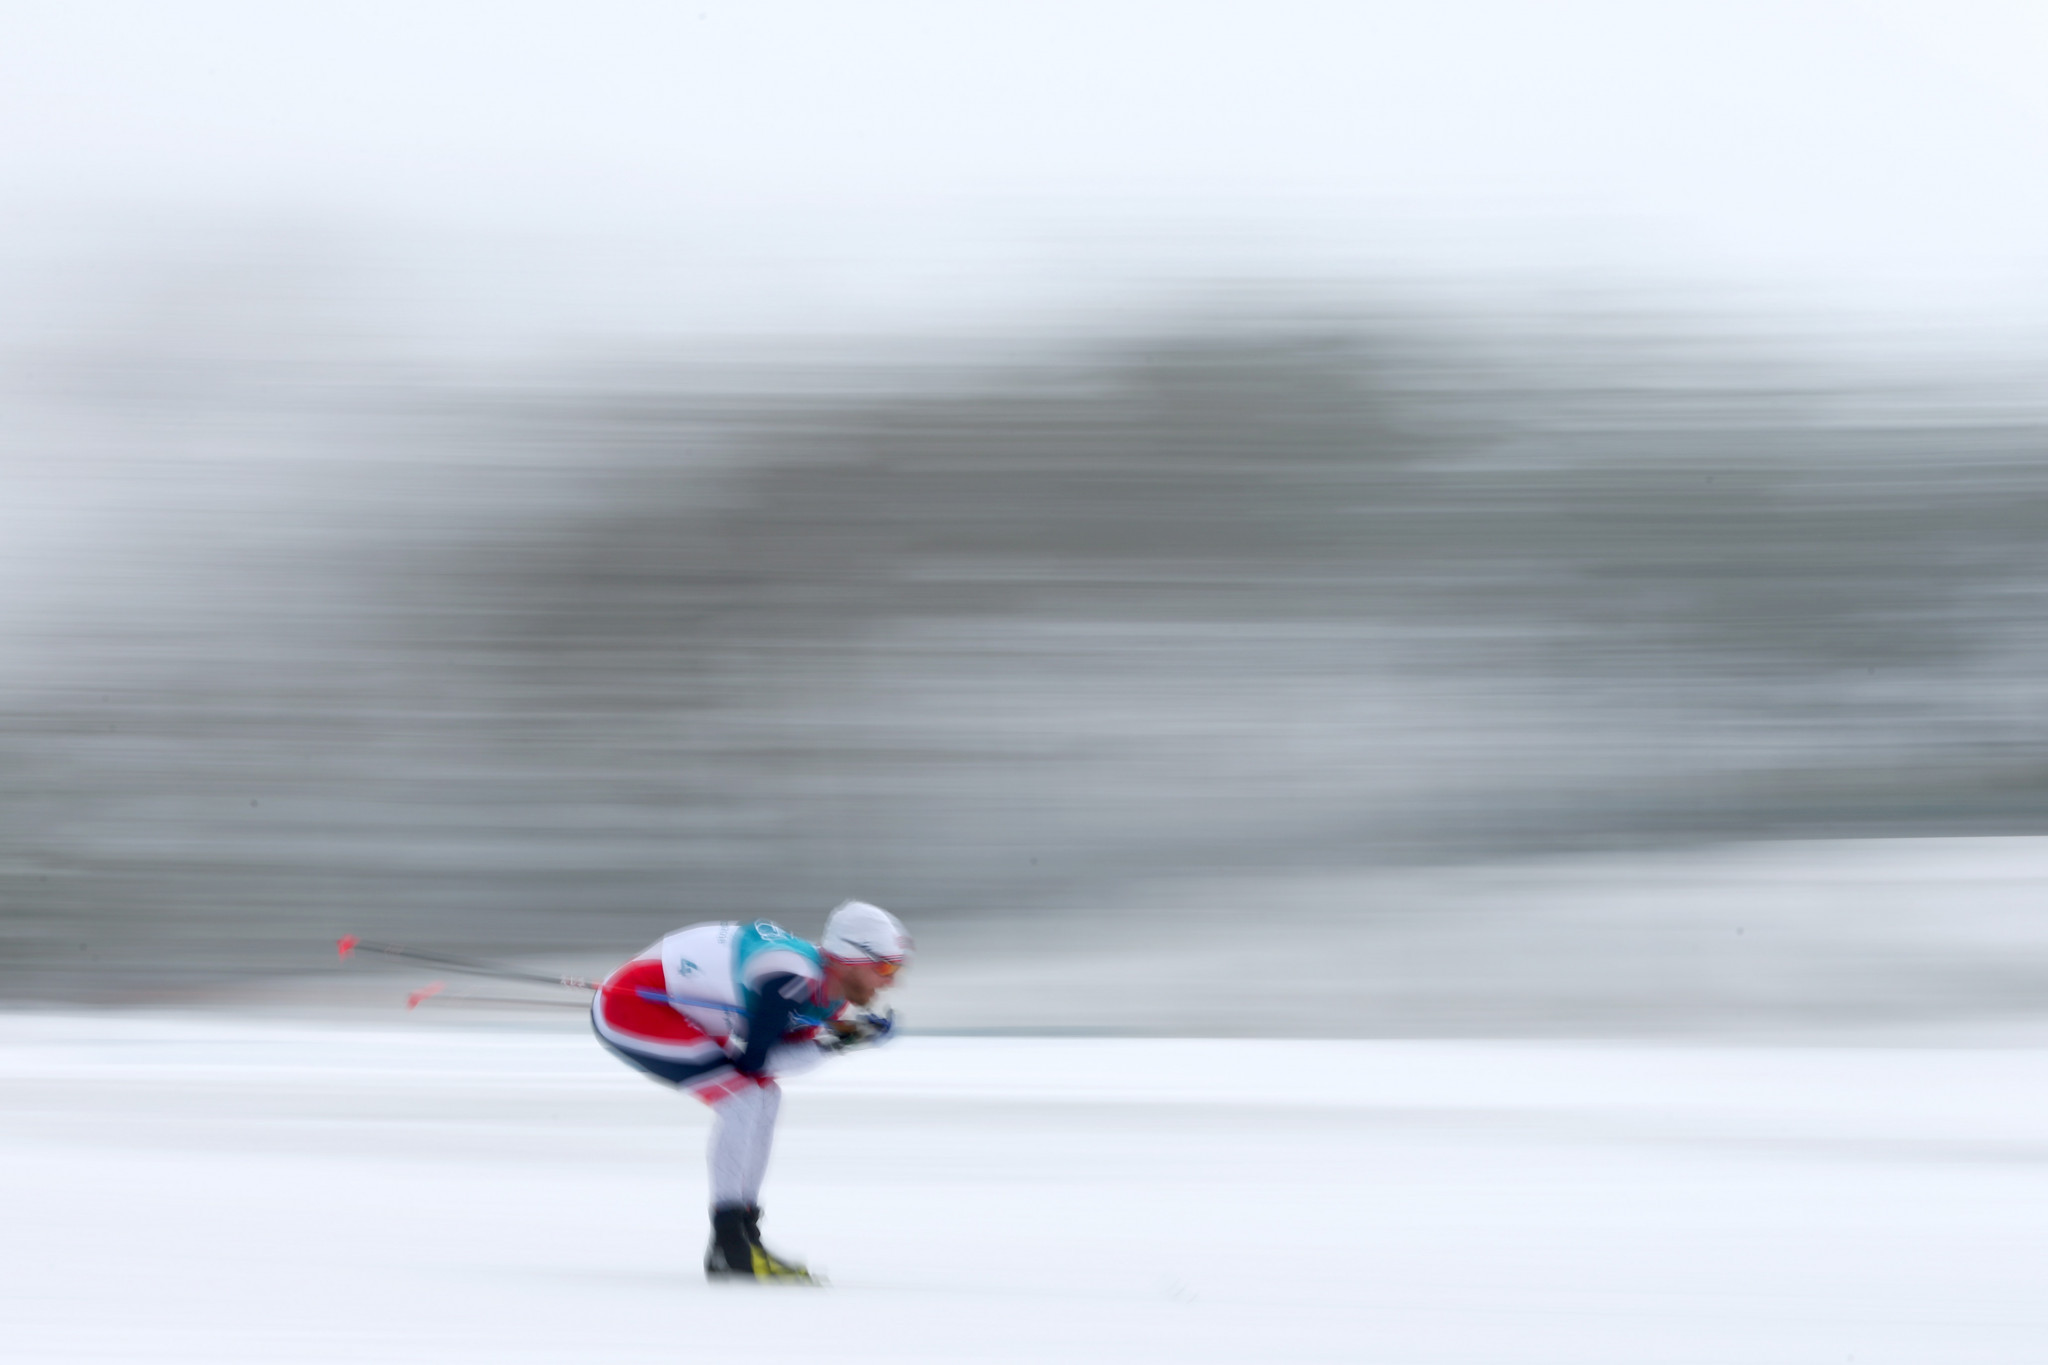 Oslo to host final mass start races of FIS Cross-Country World Cup season